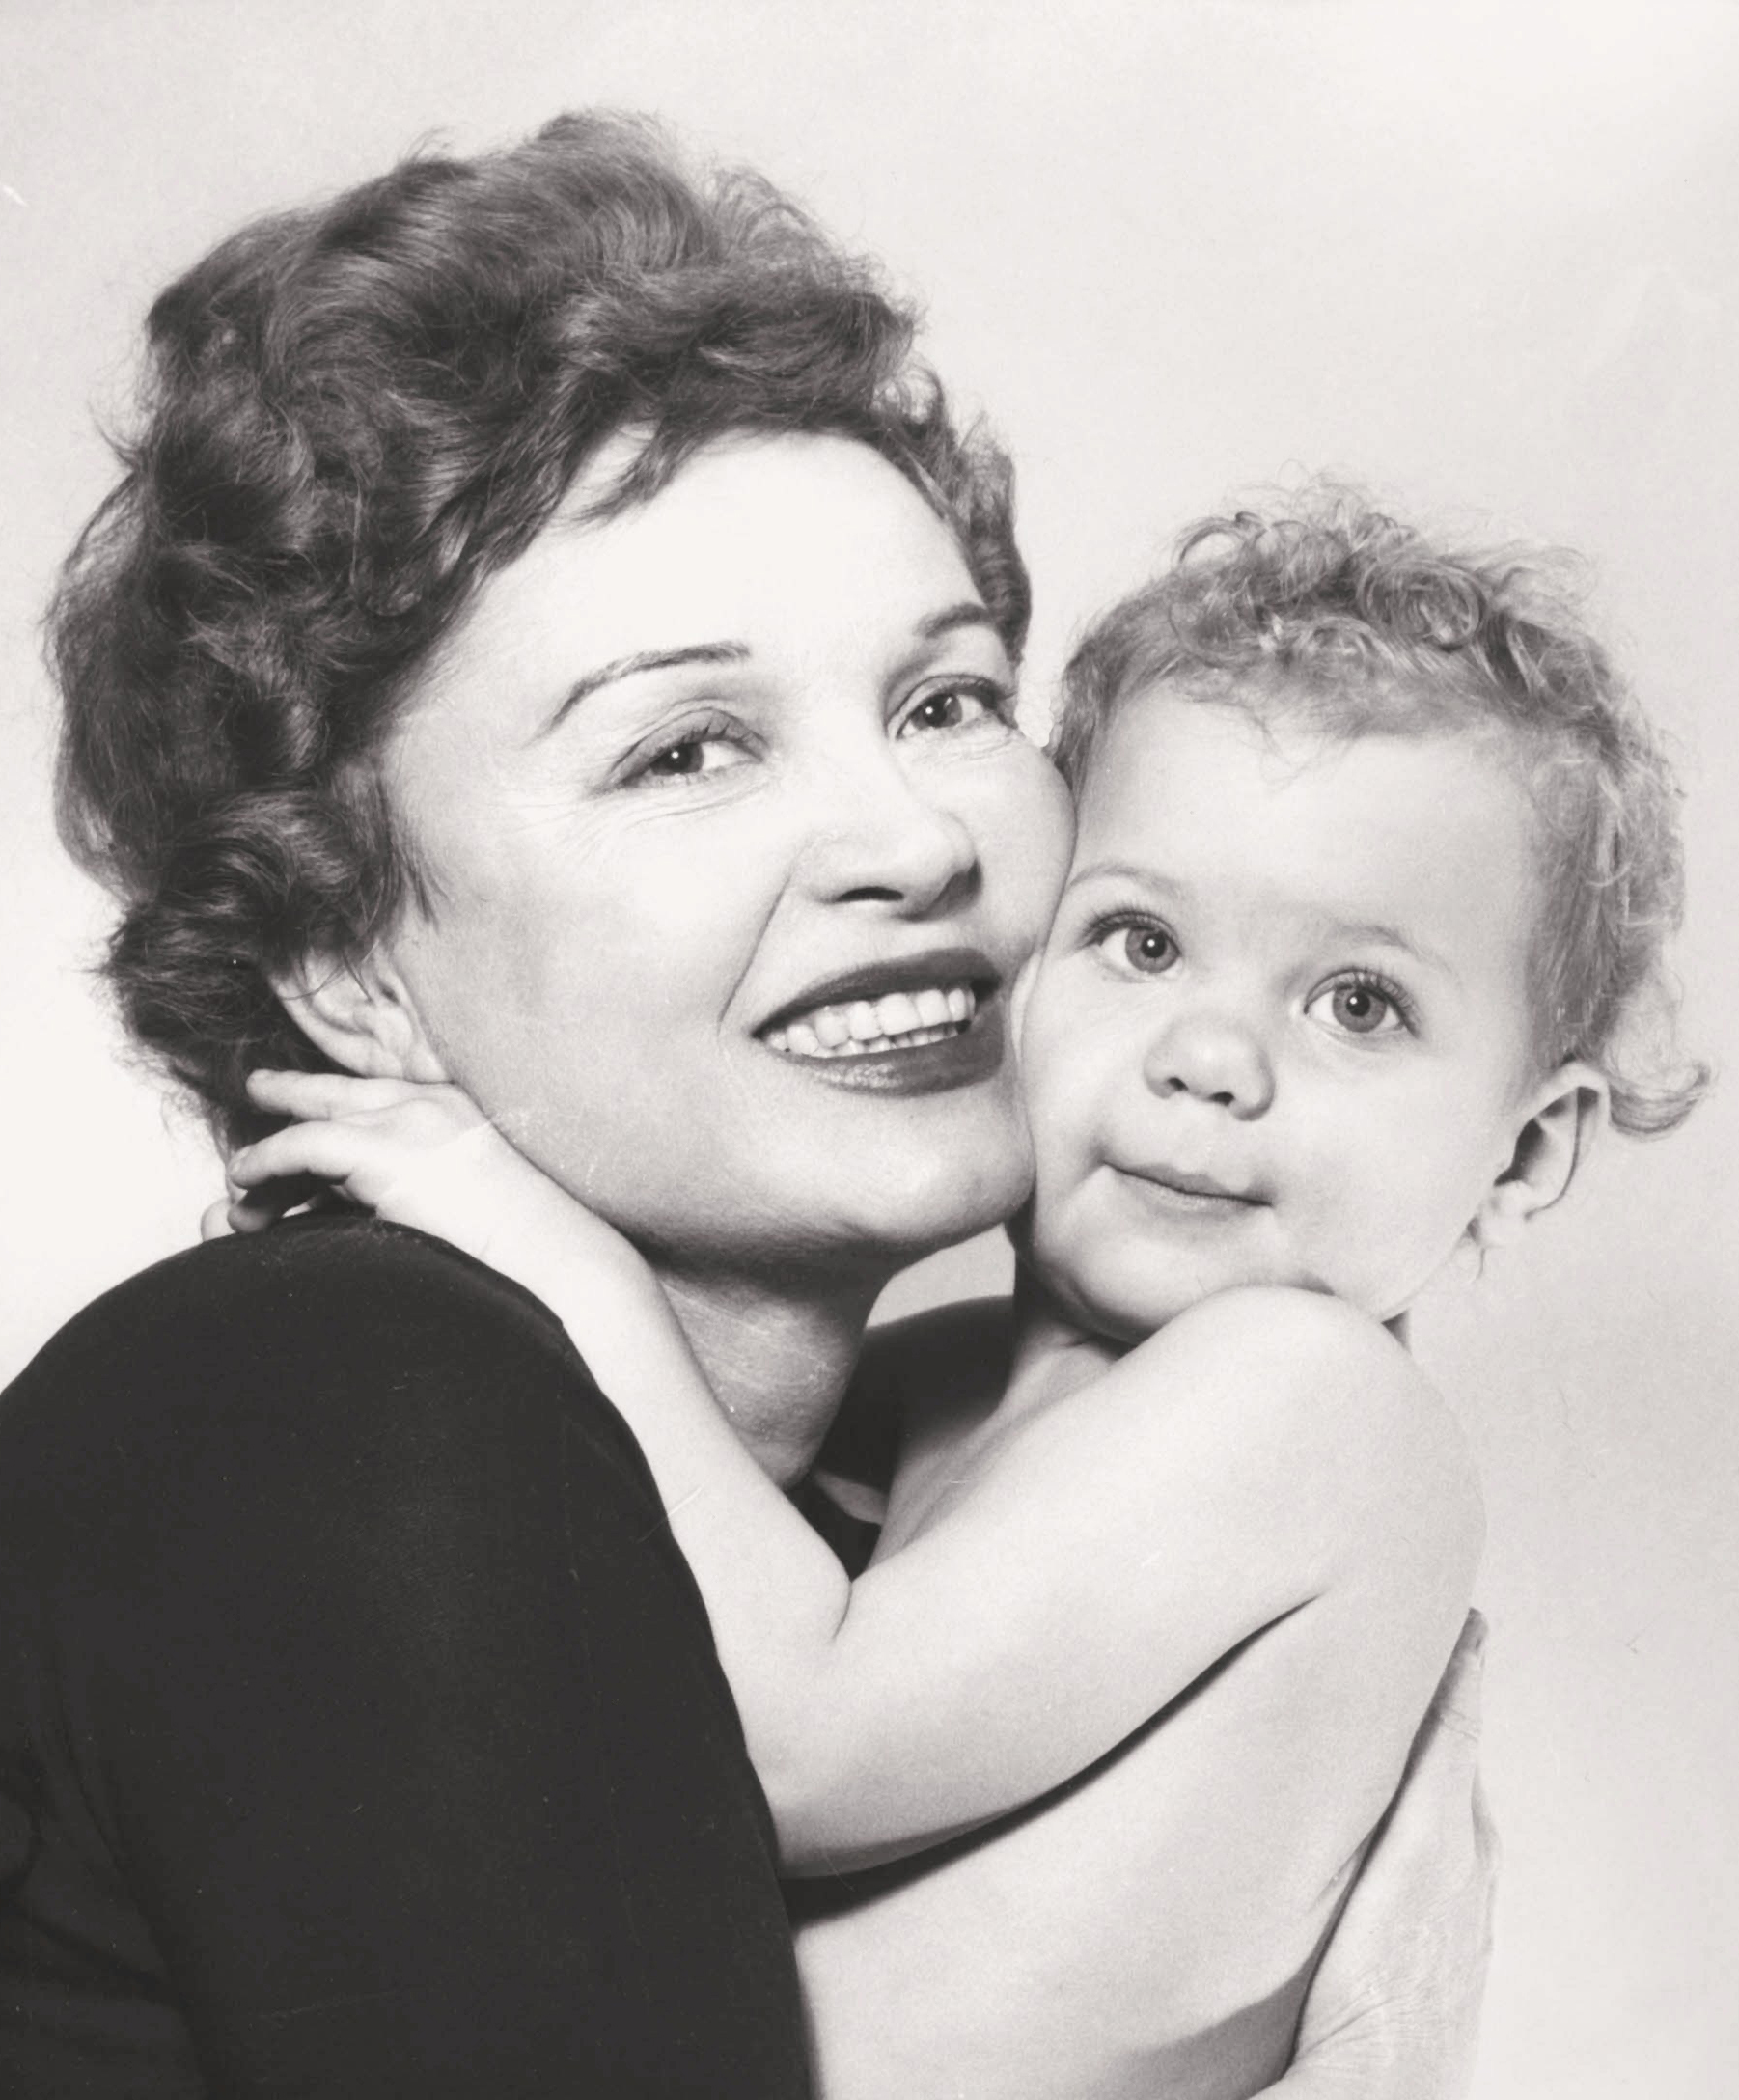 Mom and Me in 1960! She left me a legacy that will live on forever.